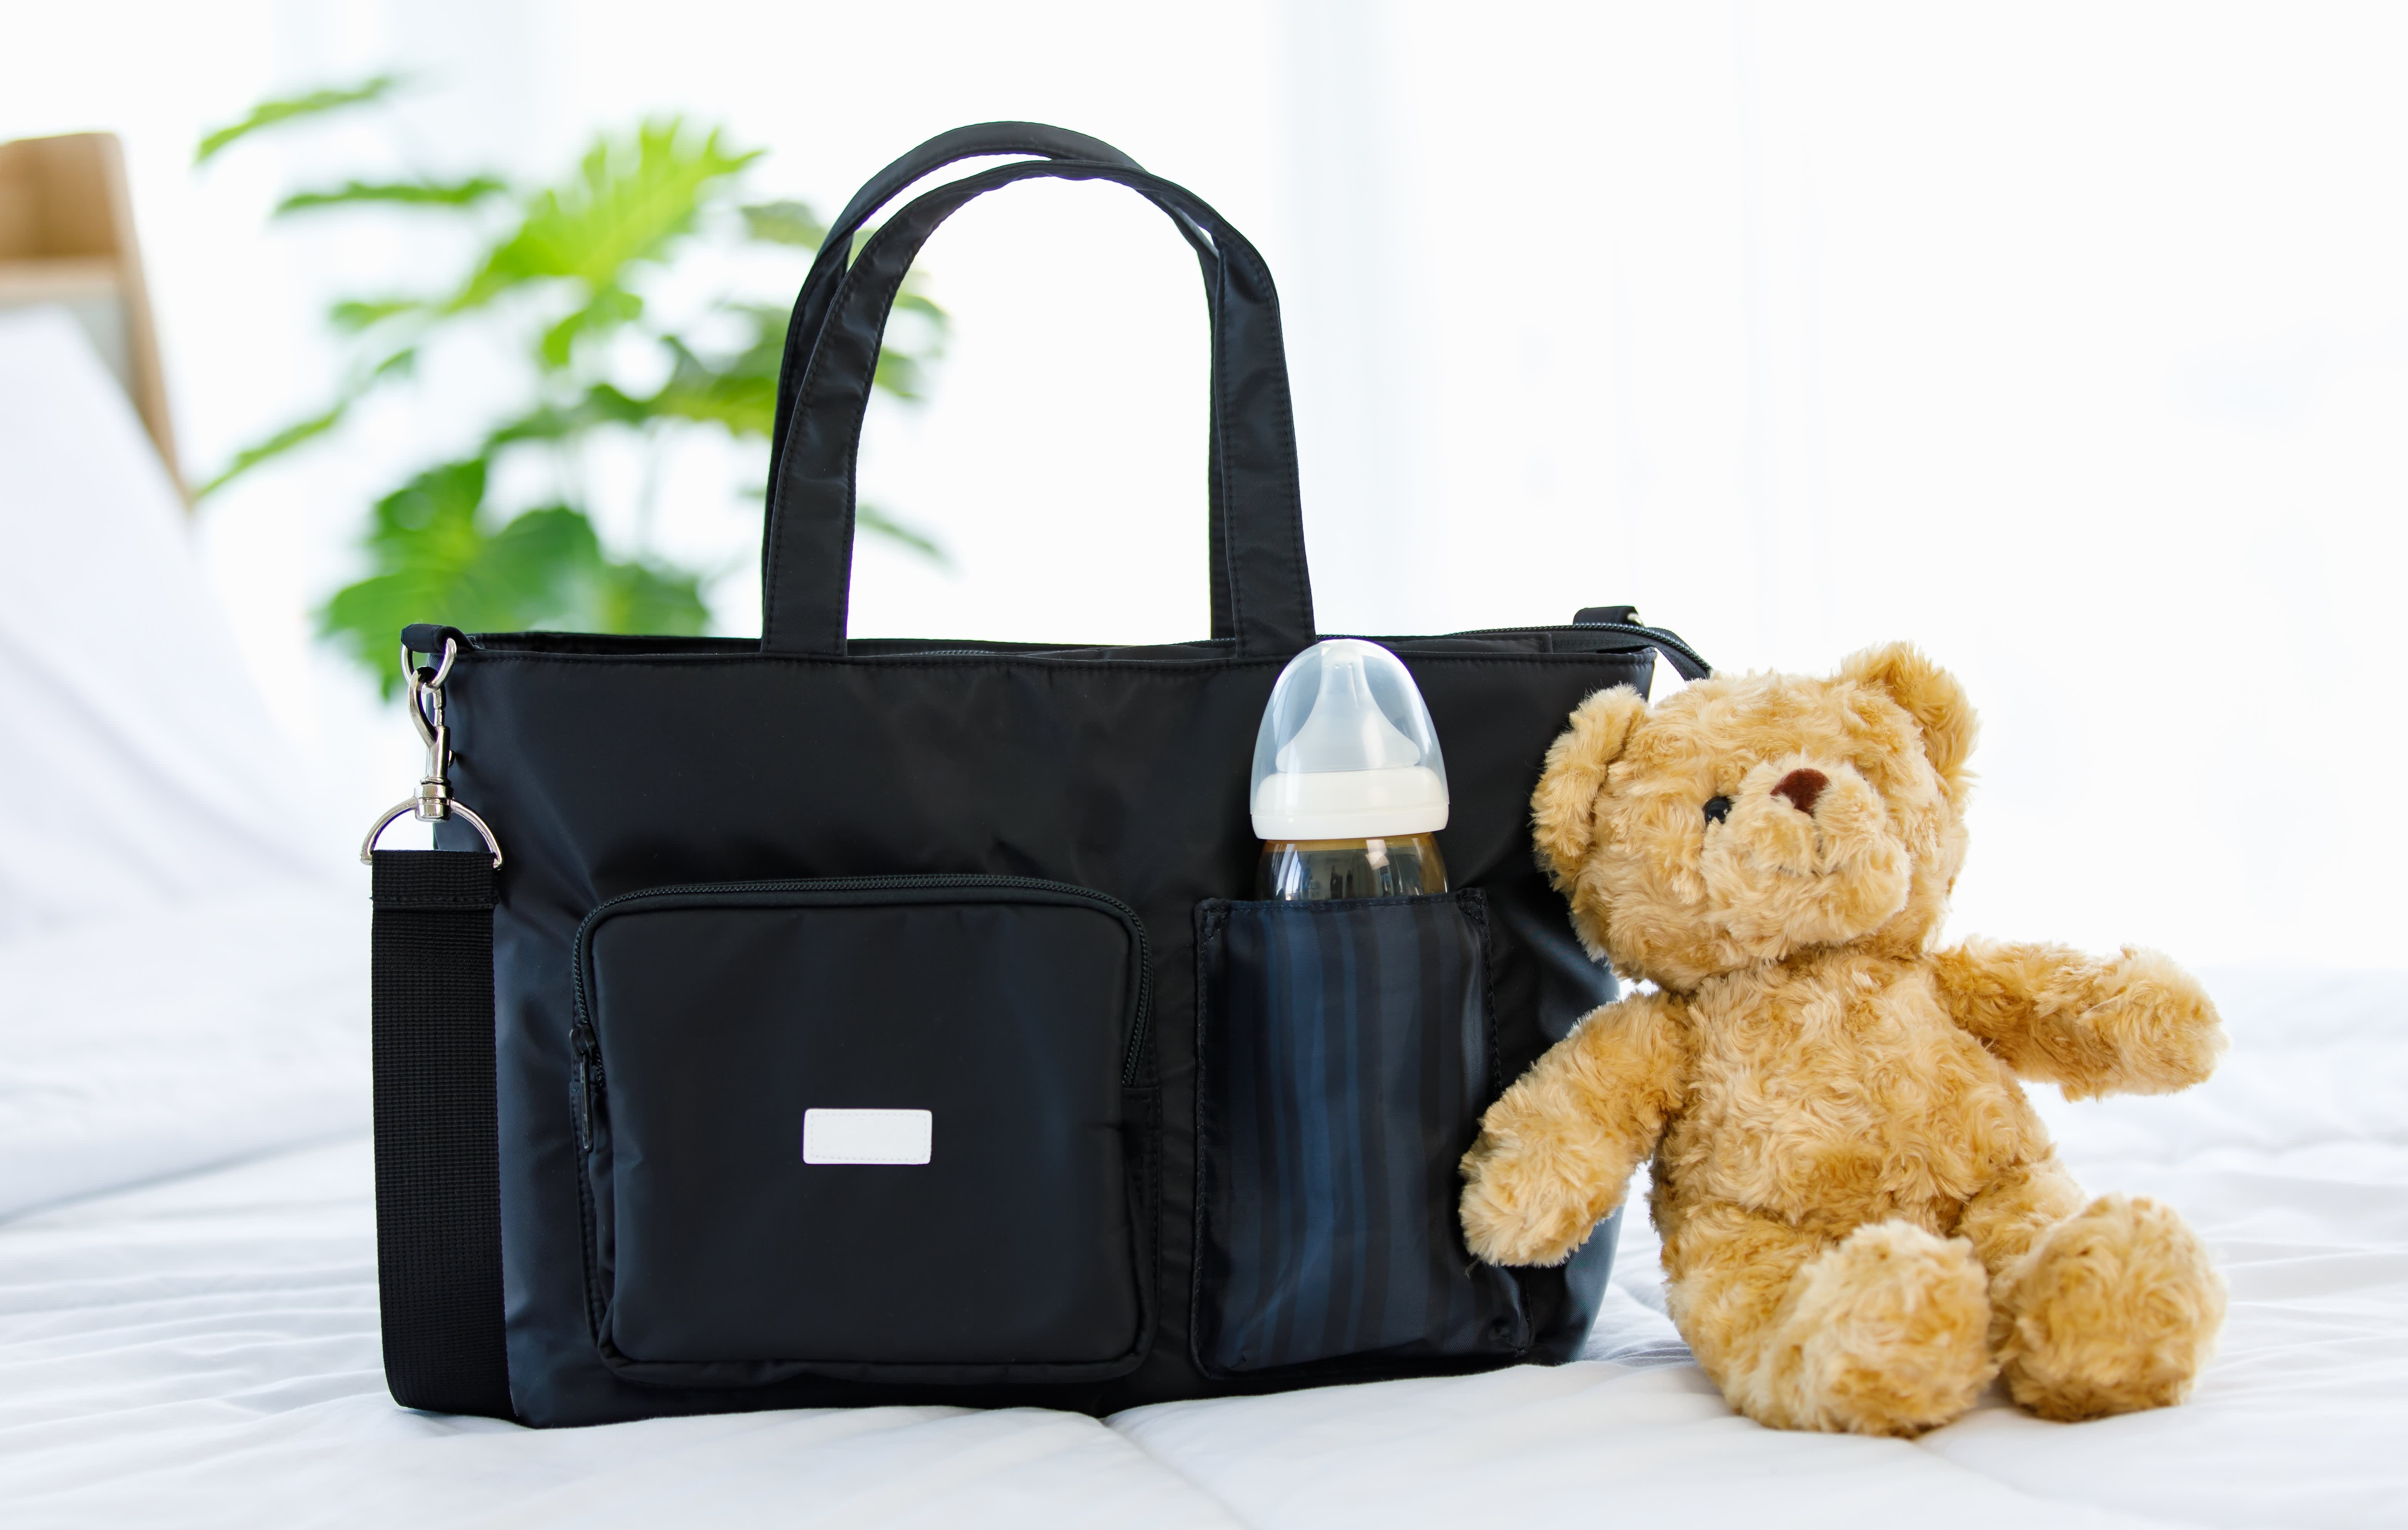 Essentials to Pack in Your Diaper Bag - CNET